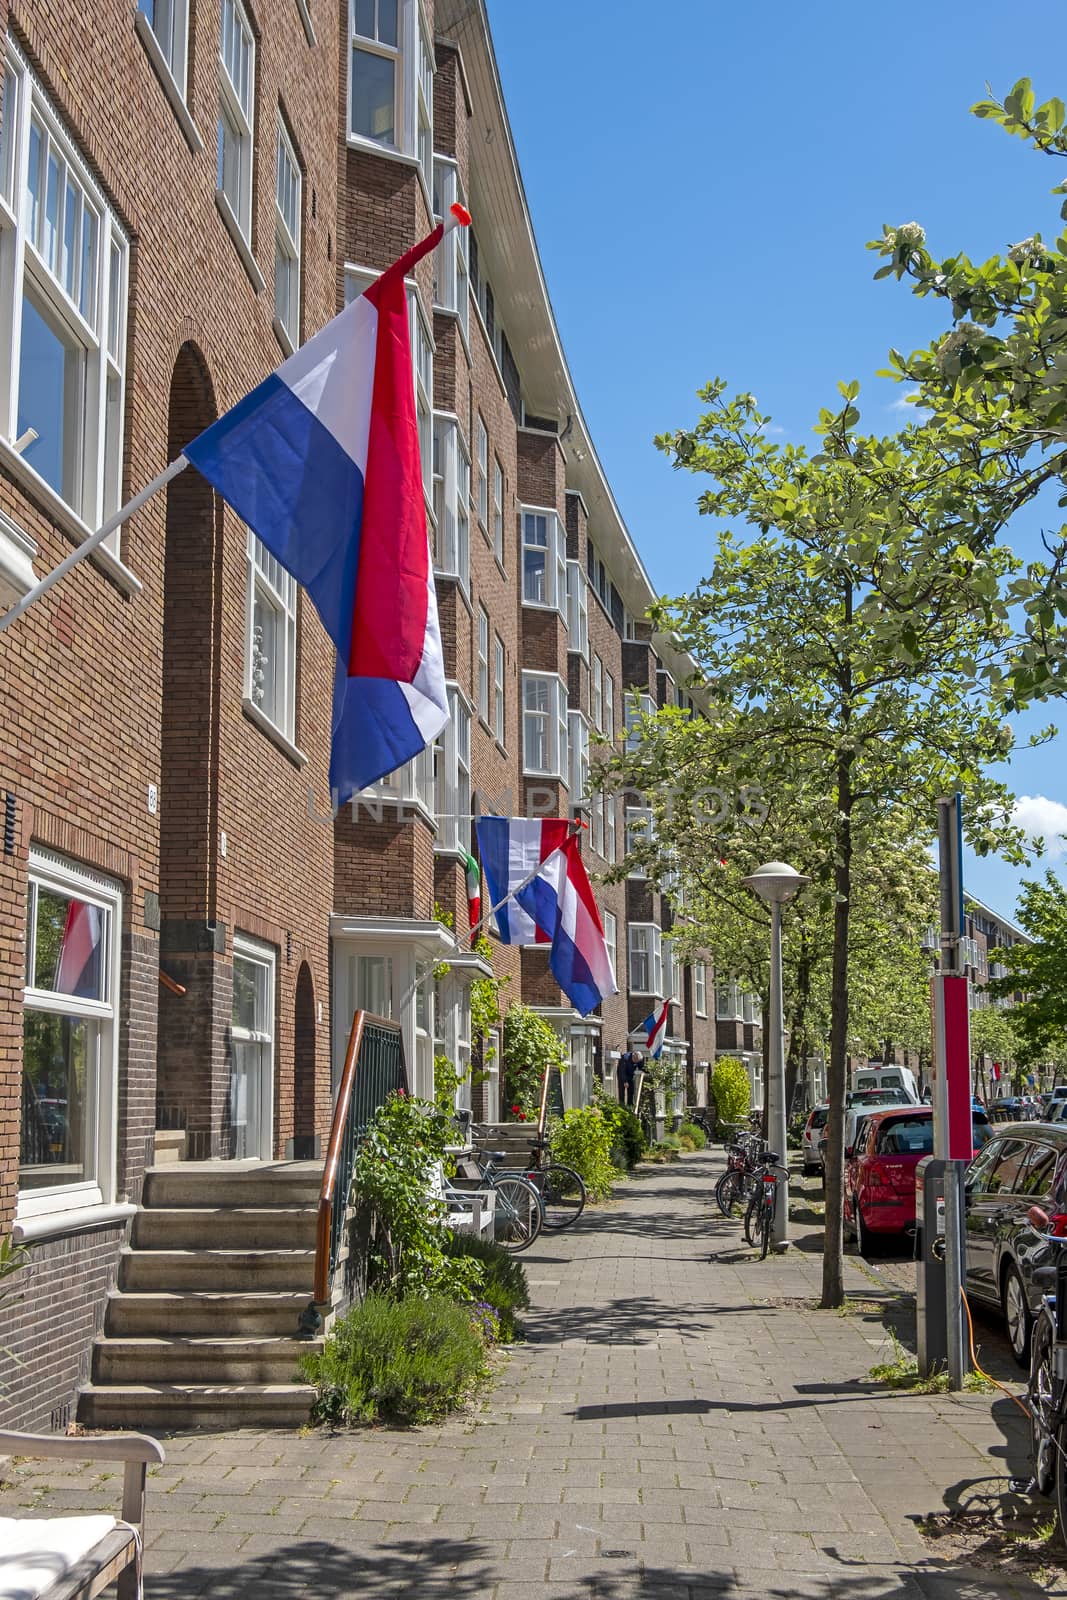 Flags on the houses in Amsterdam in the Netherlands at kingsday